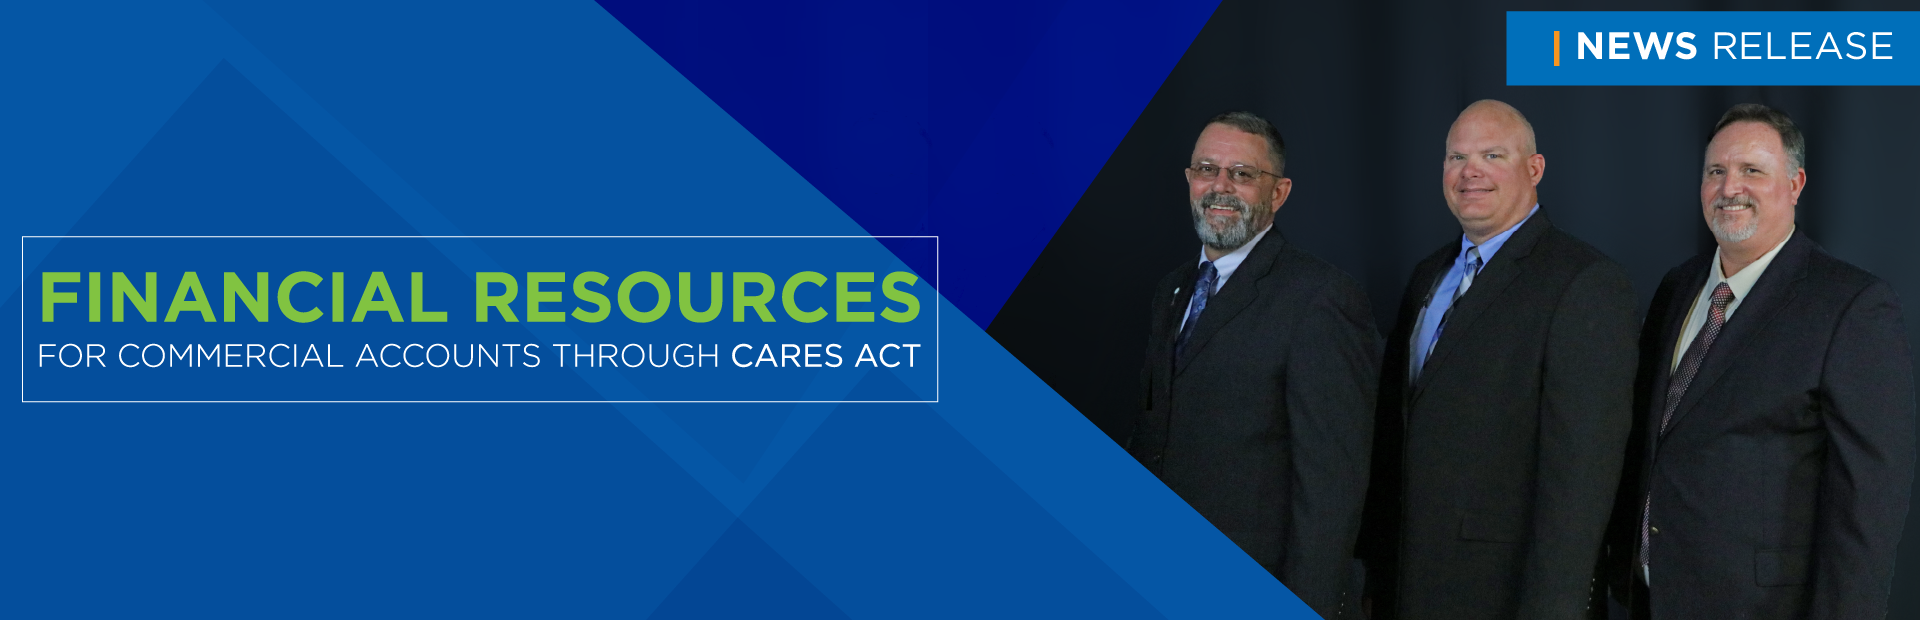 Financial Resources for Commercial Accounts  Through CARES Act